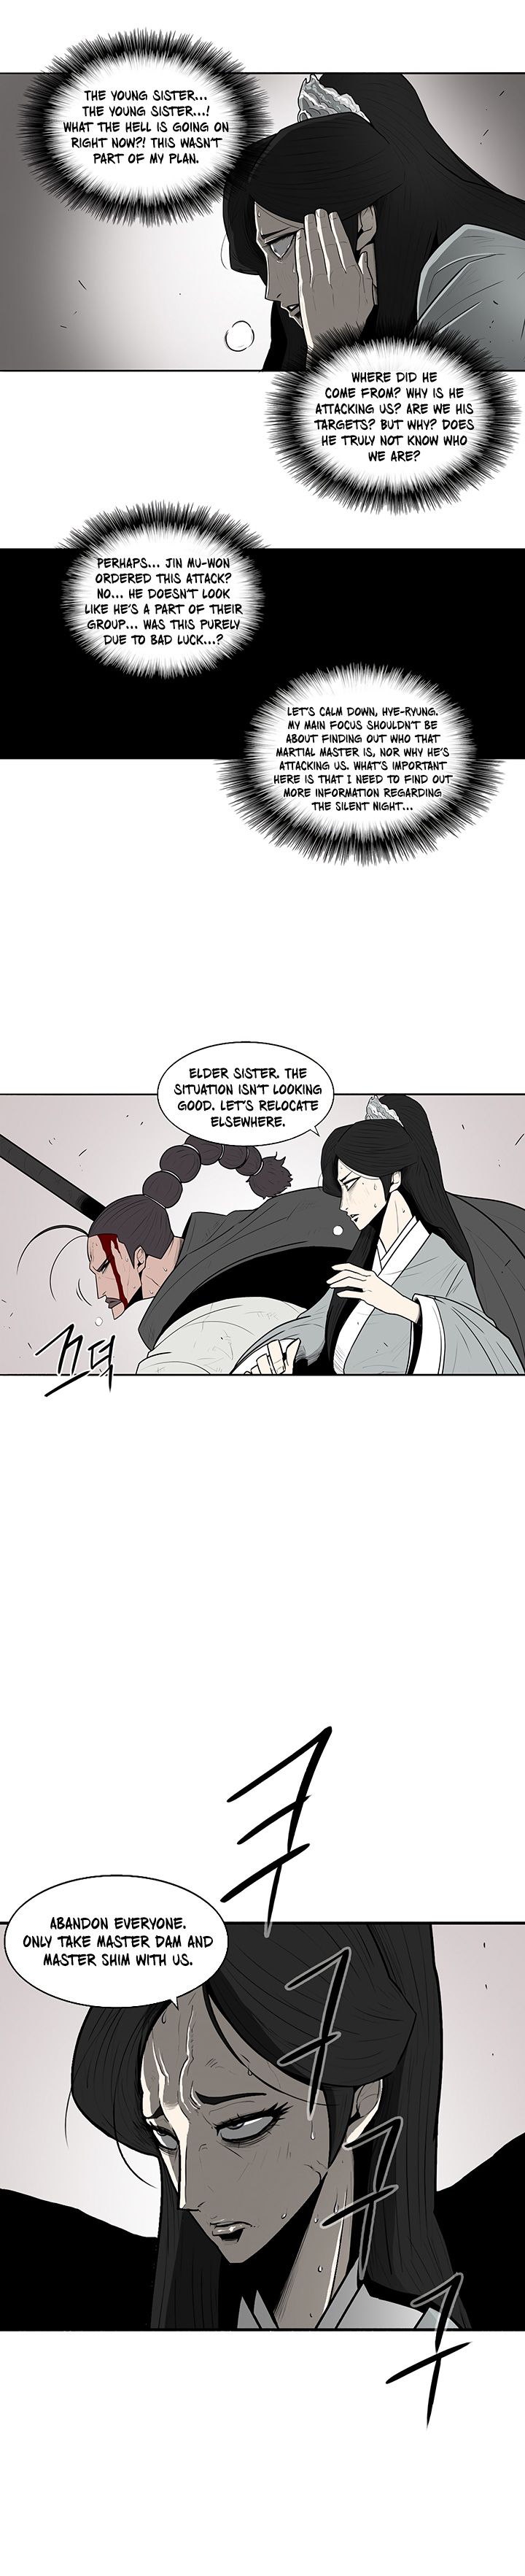 Legend of the Northern Blade Chapter 11